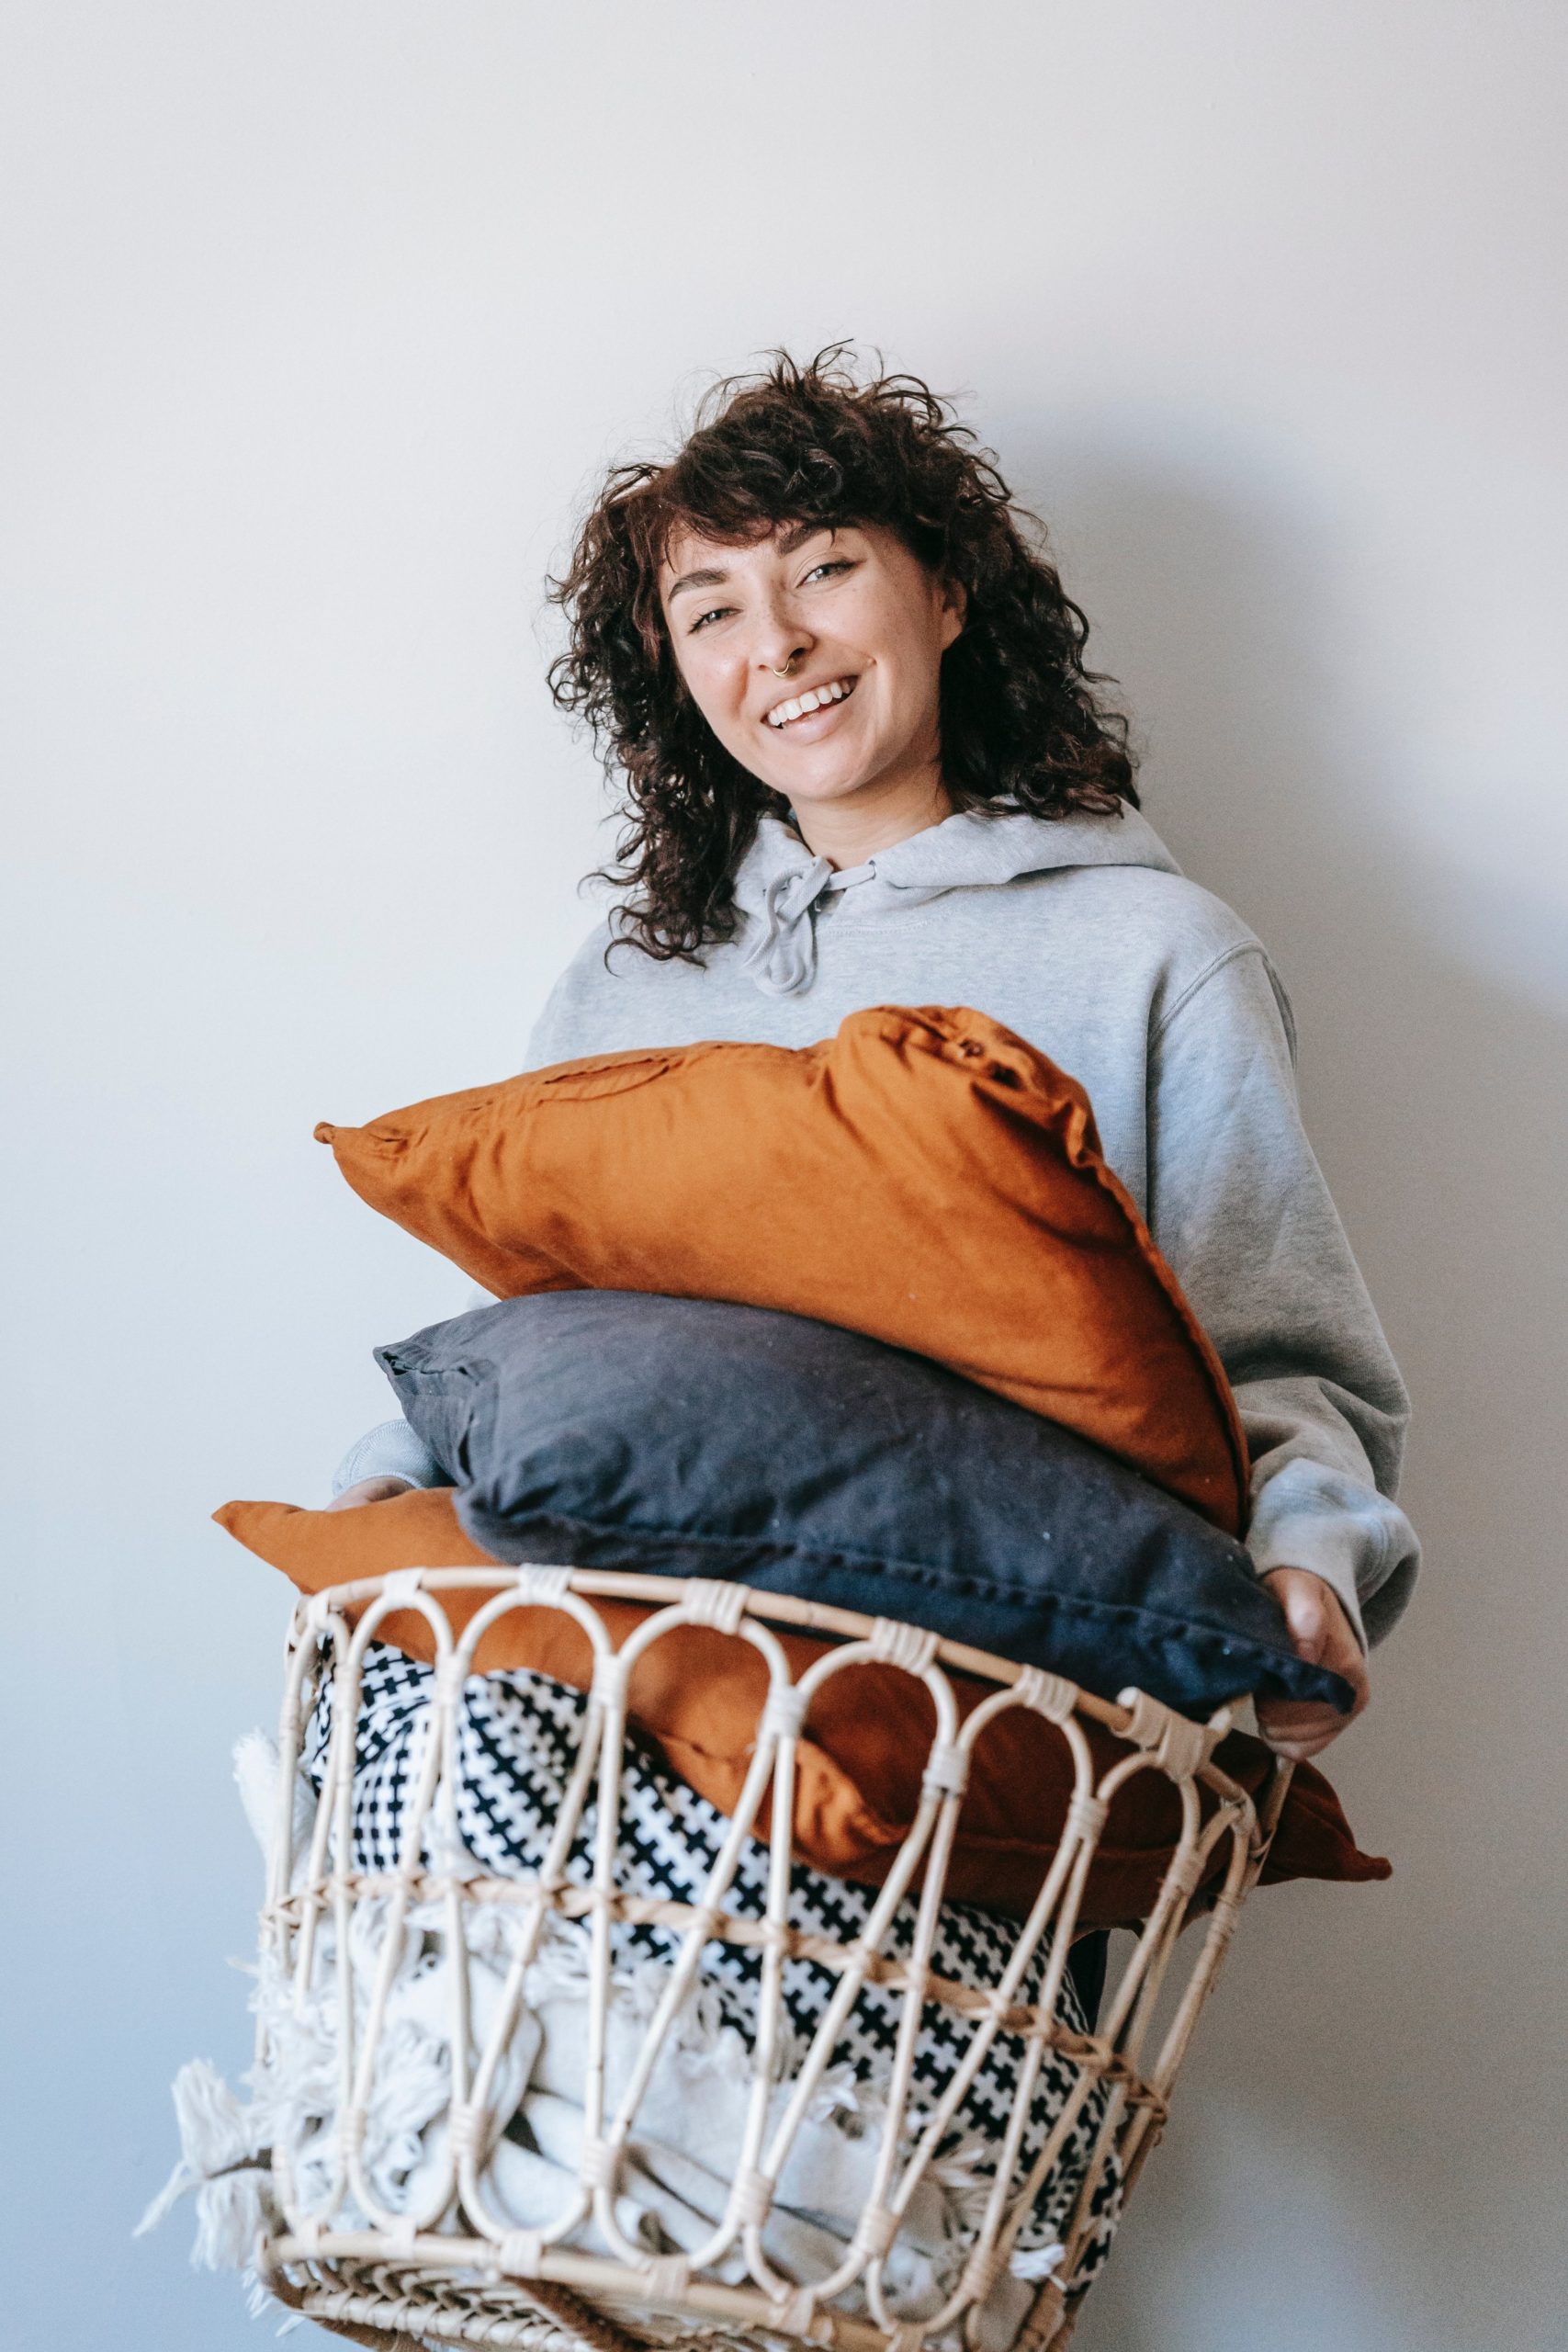 a woman in a sweatshirt carries a basket filled with linens and pillows